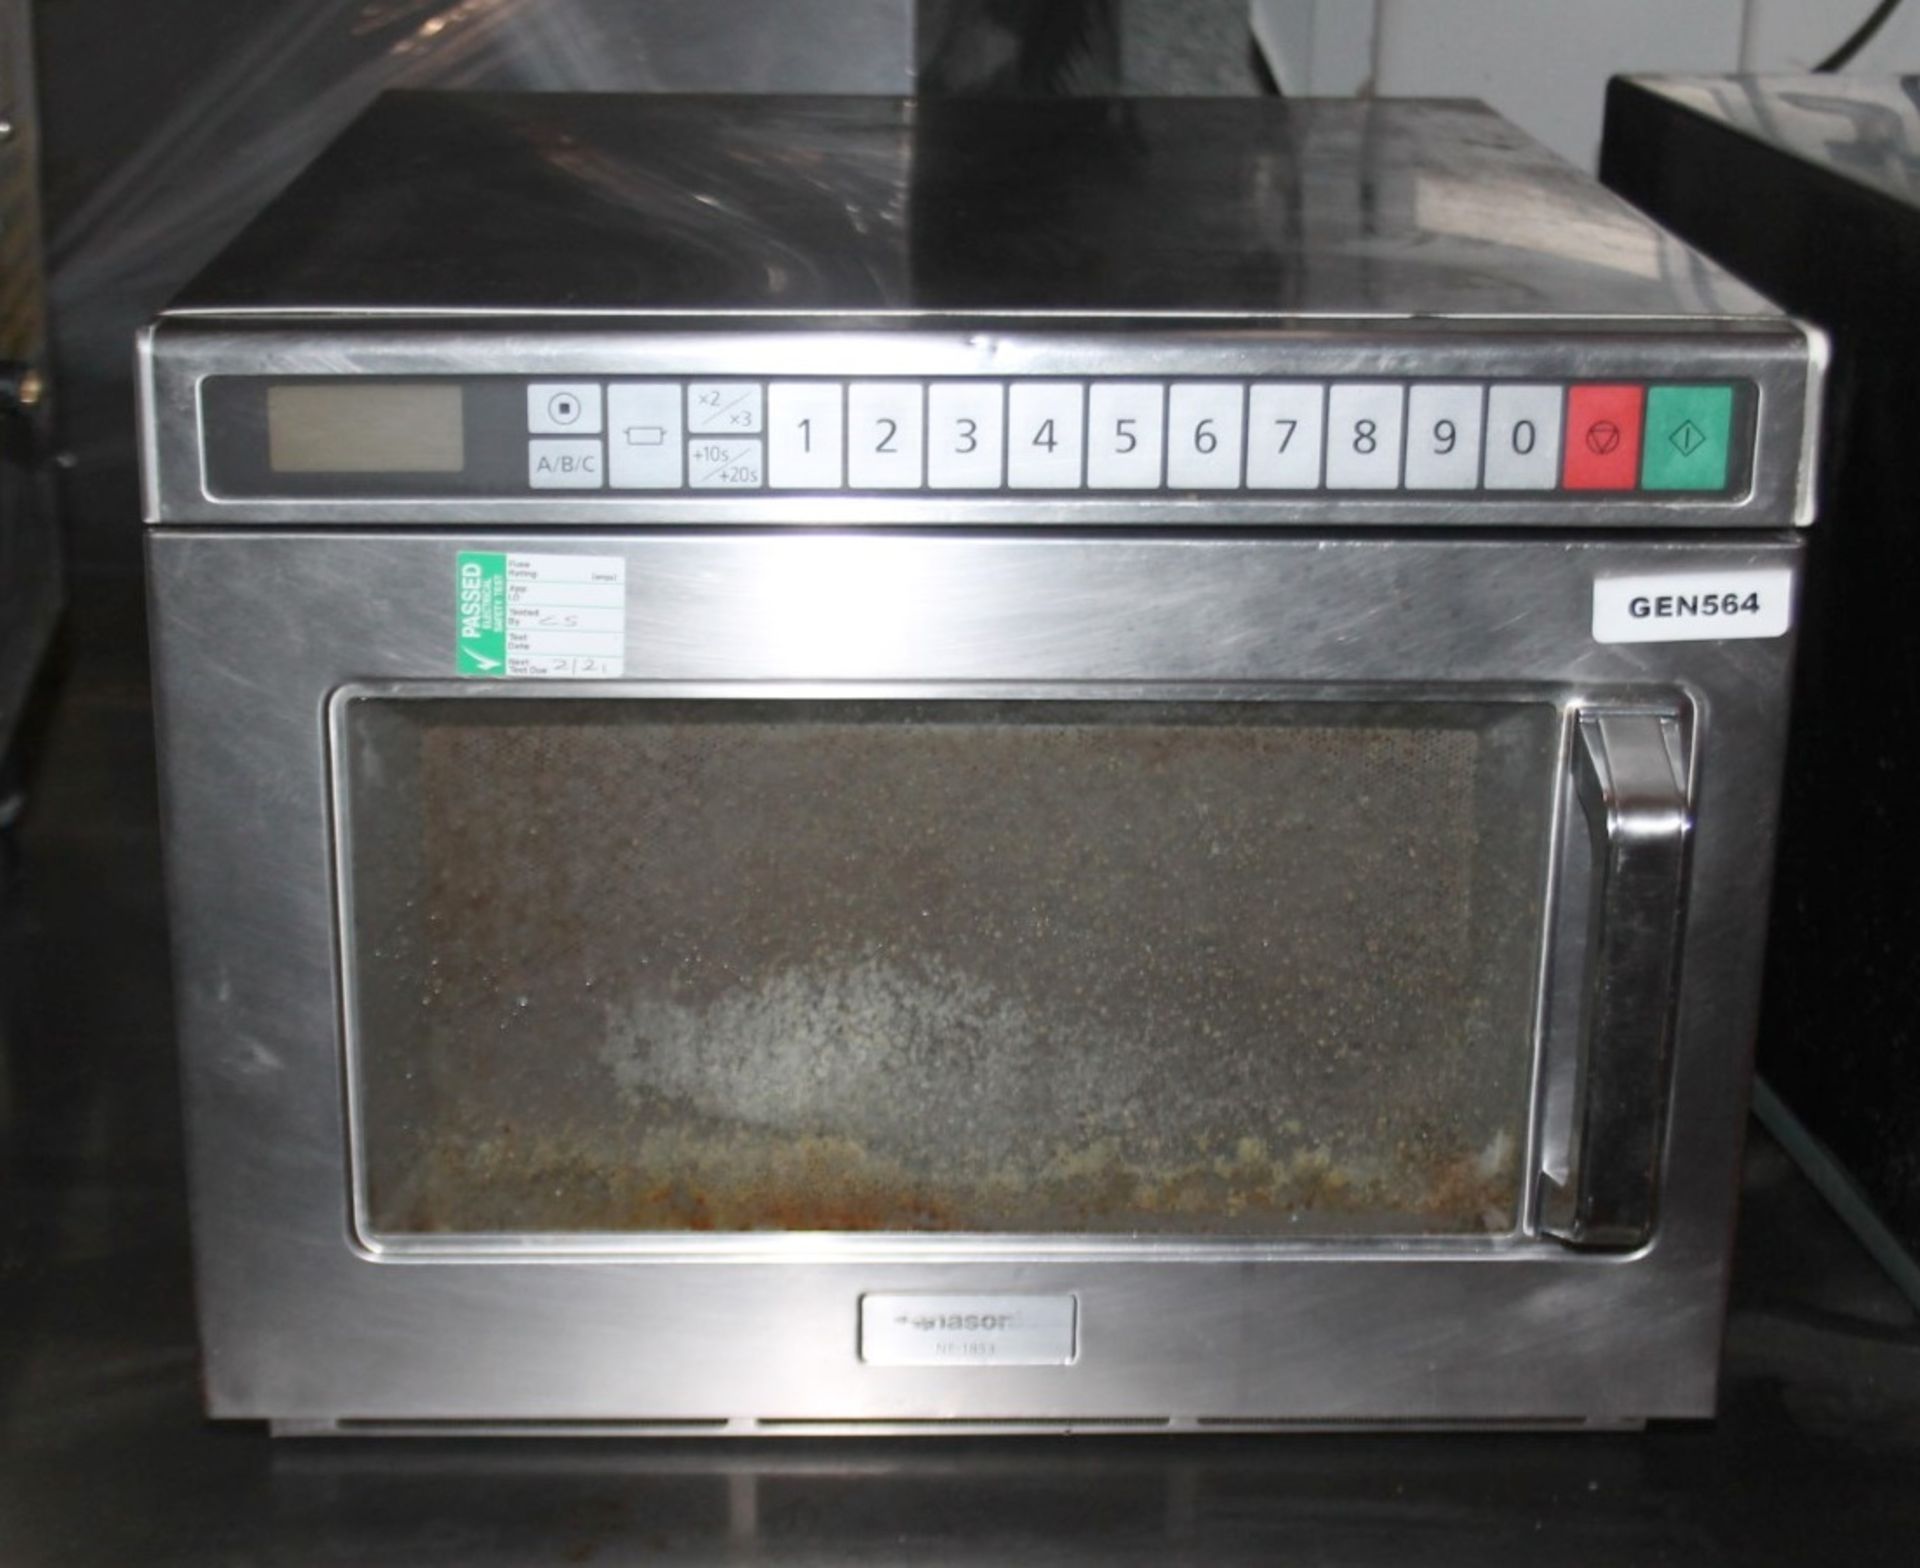 1 x Panasonic Commercial Microwave Oven Featuring A Stainless Steel Exterior And 'Microsave' - Image 5 of 7